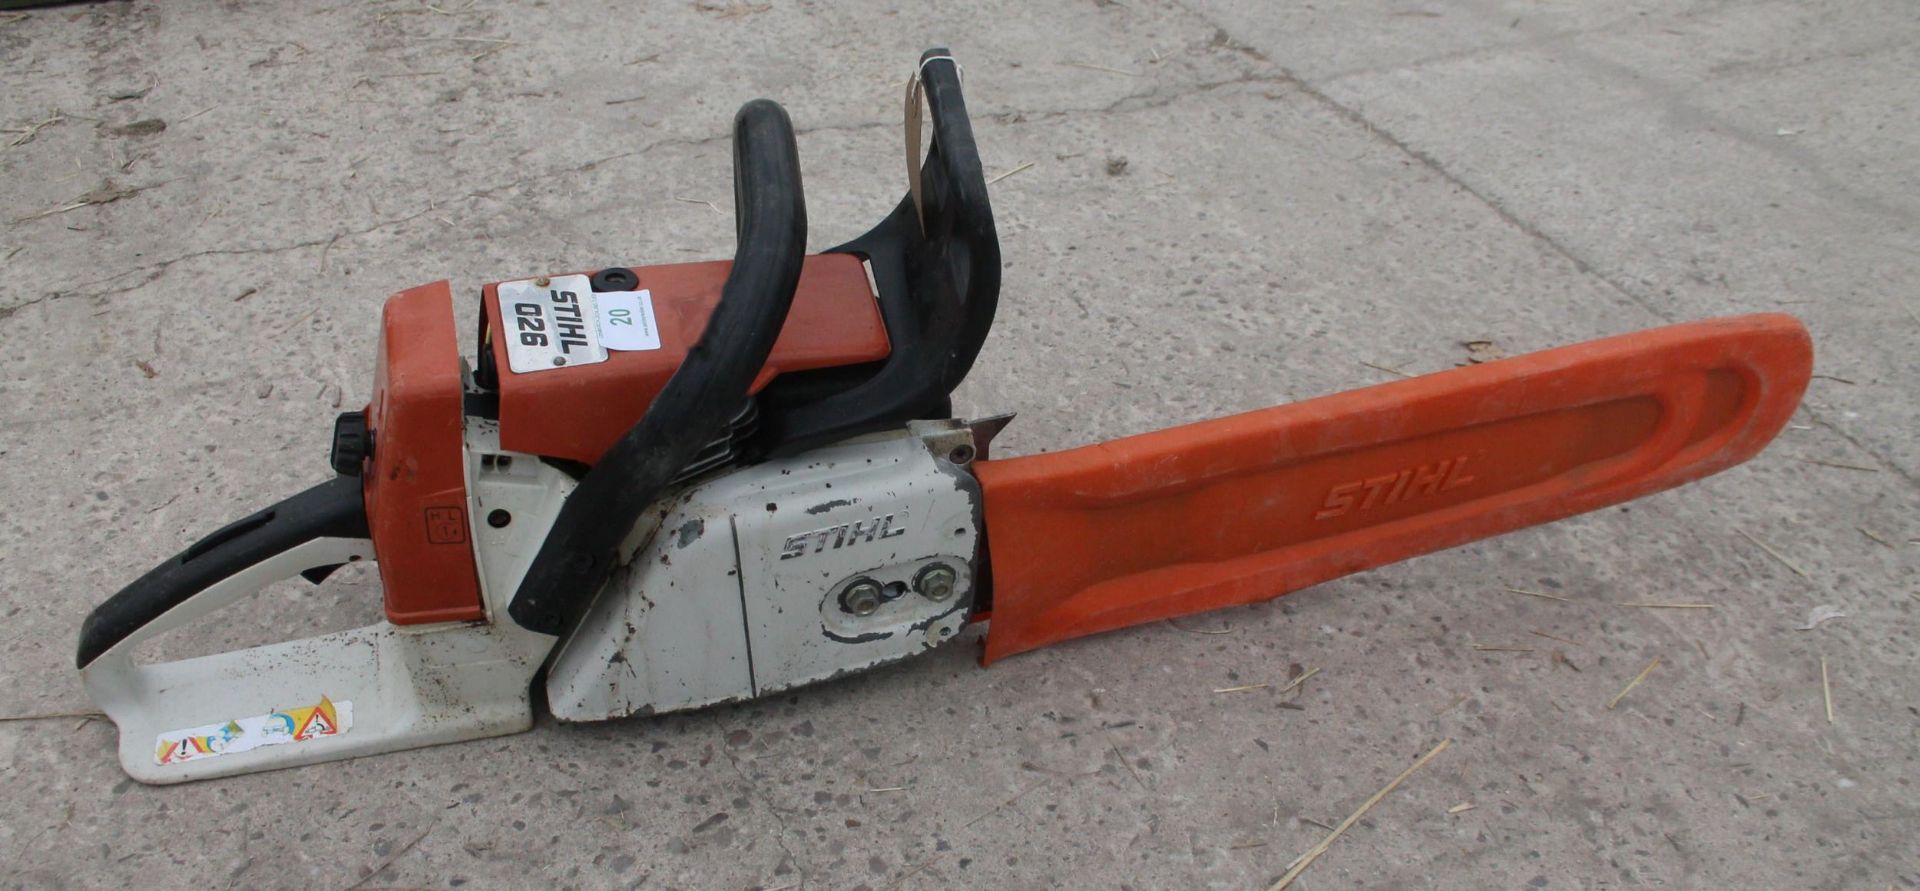 STIHL O26 CHAINSAW IN GOOD WORKING ORDER NO VAT - Image 2 of 2